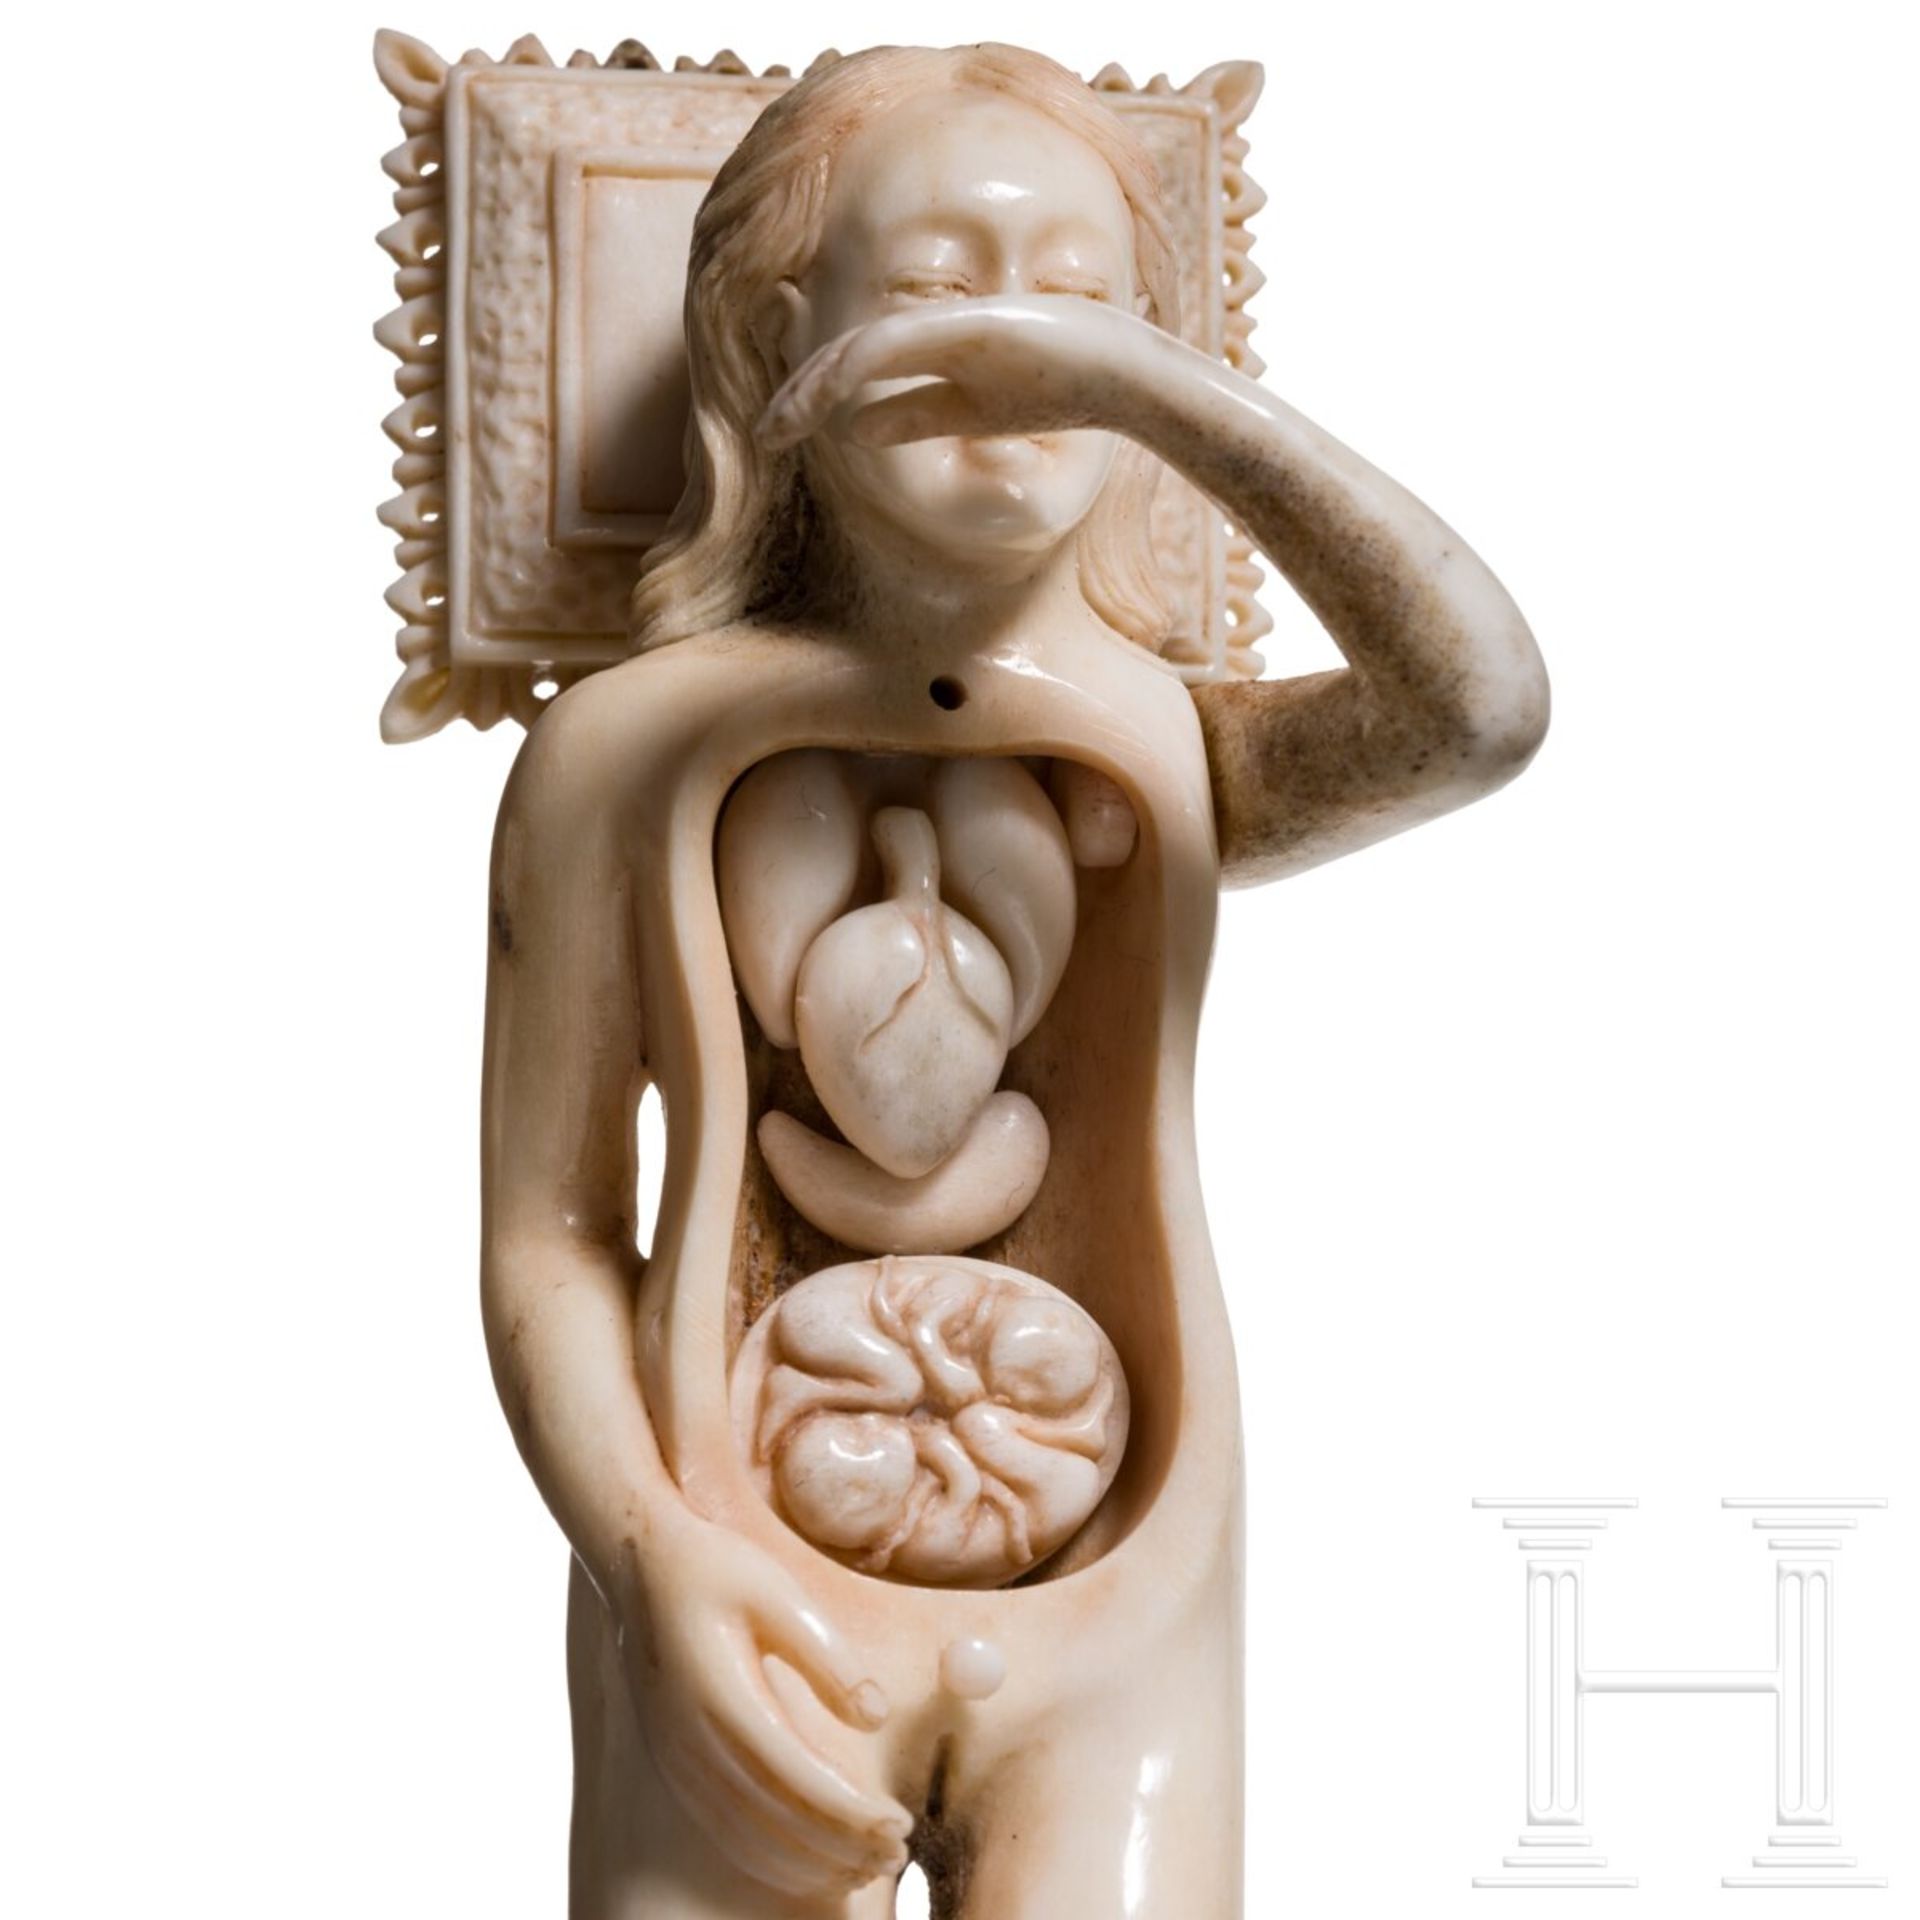 Anatomisches Modell (Doctor's Lady) im Stil des 17. Jhdts., wohl Goa, 19. Jhdt. - Image 3 of 5